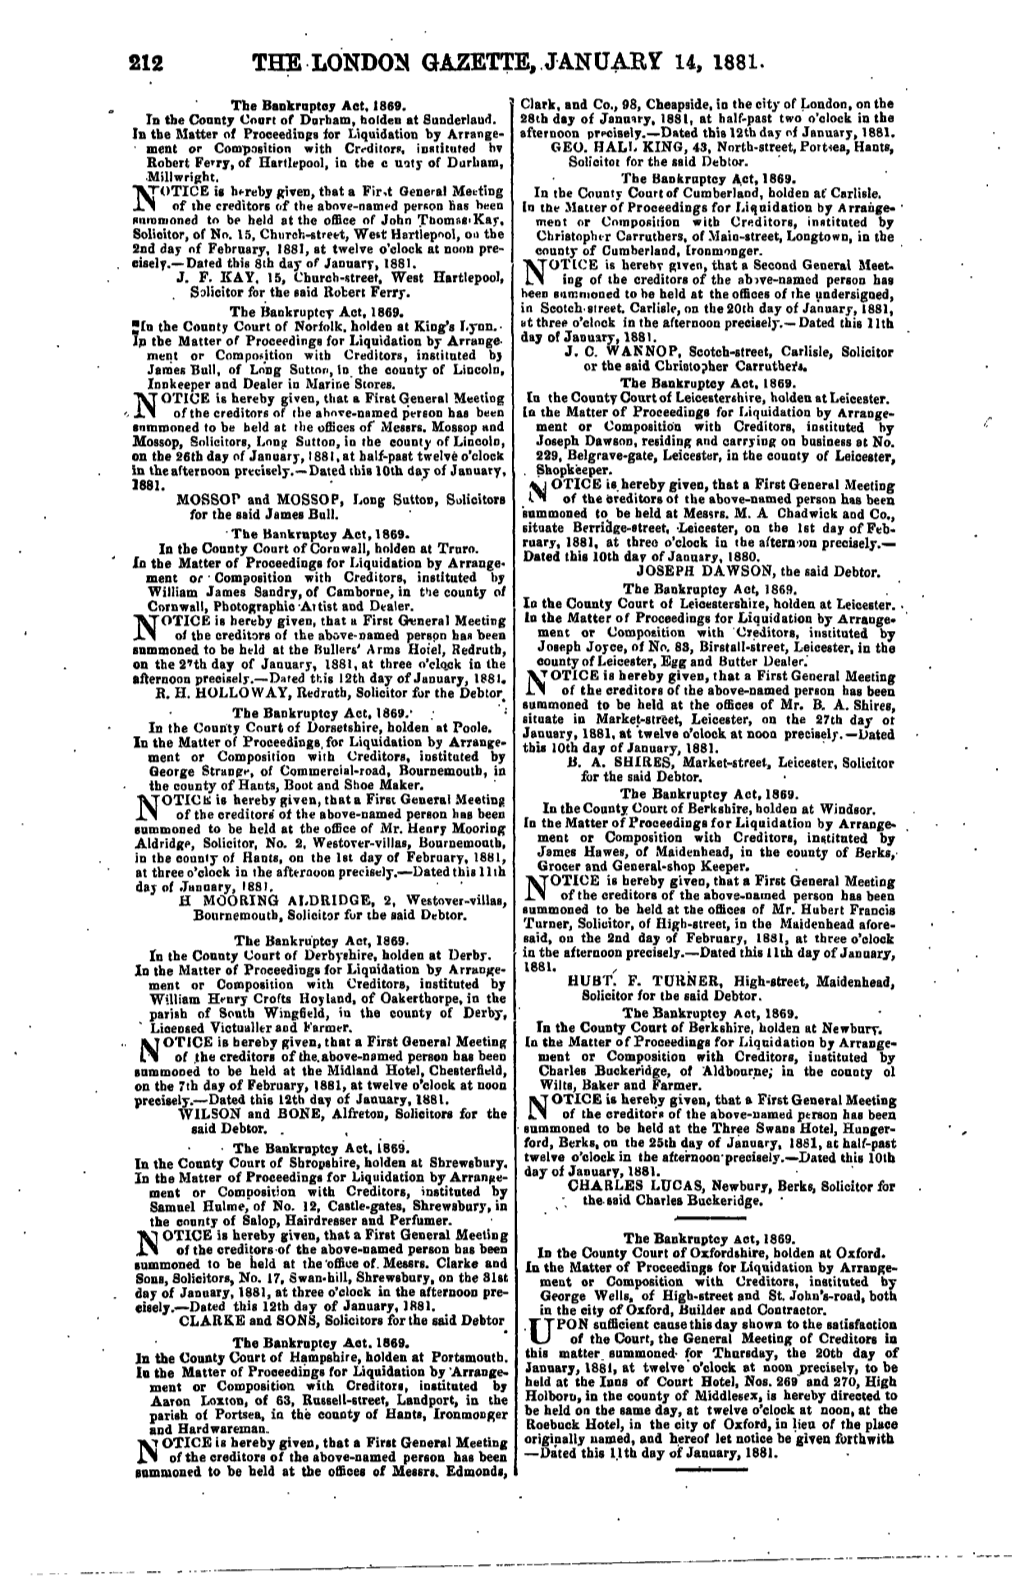 The London Gazette, Issue 24924, Page